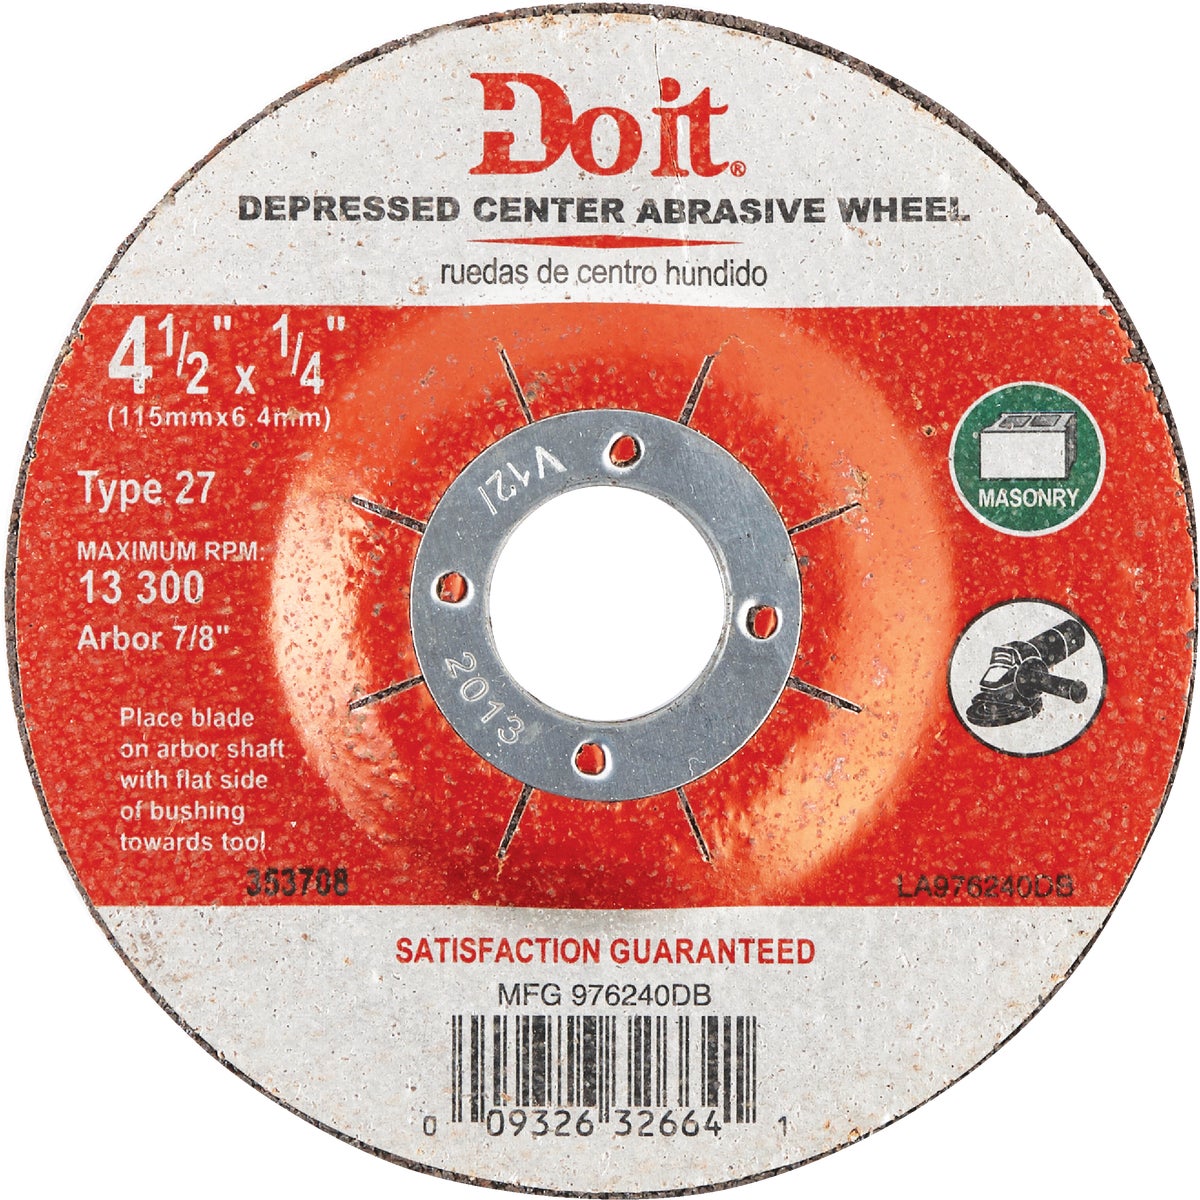 Item 353708, Silicon carbide grinding wheels are used for grinding and cutting metal and